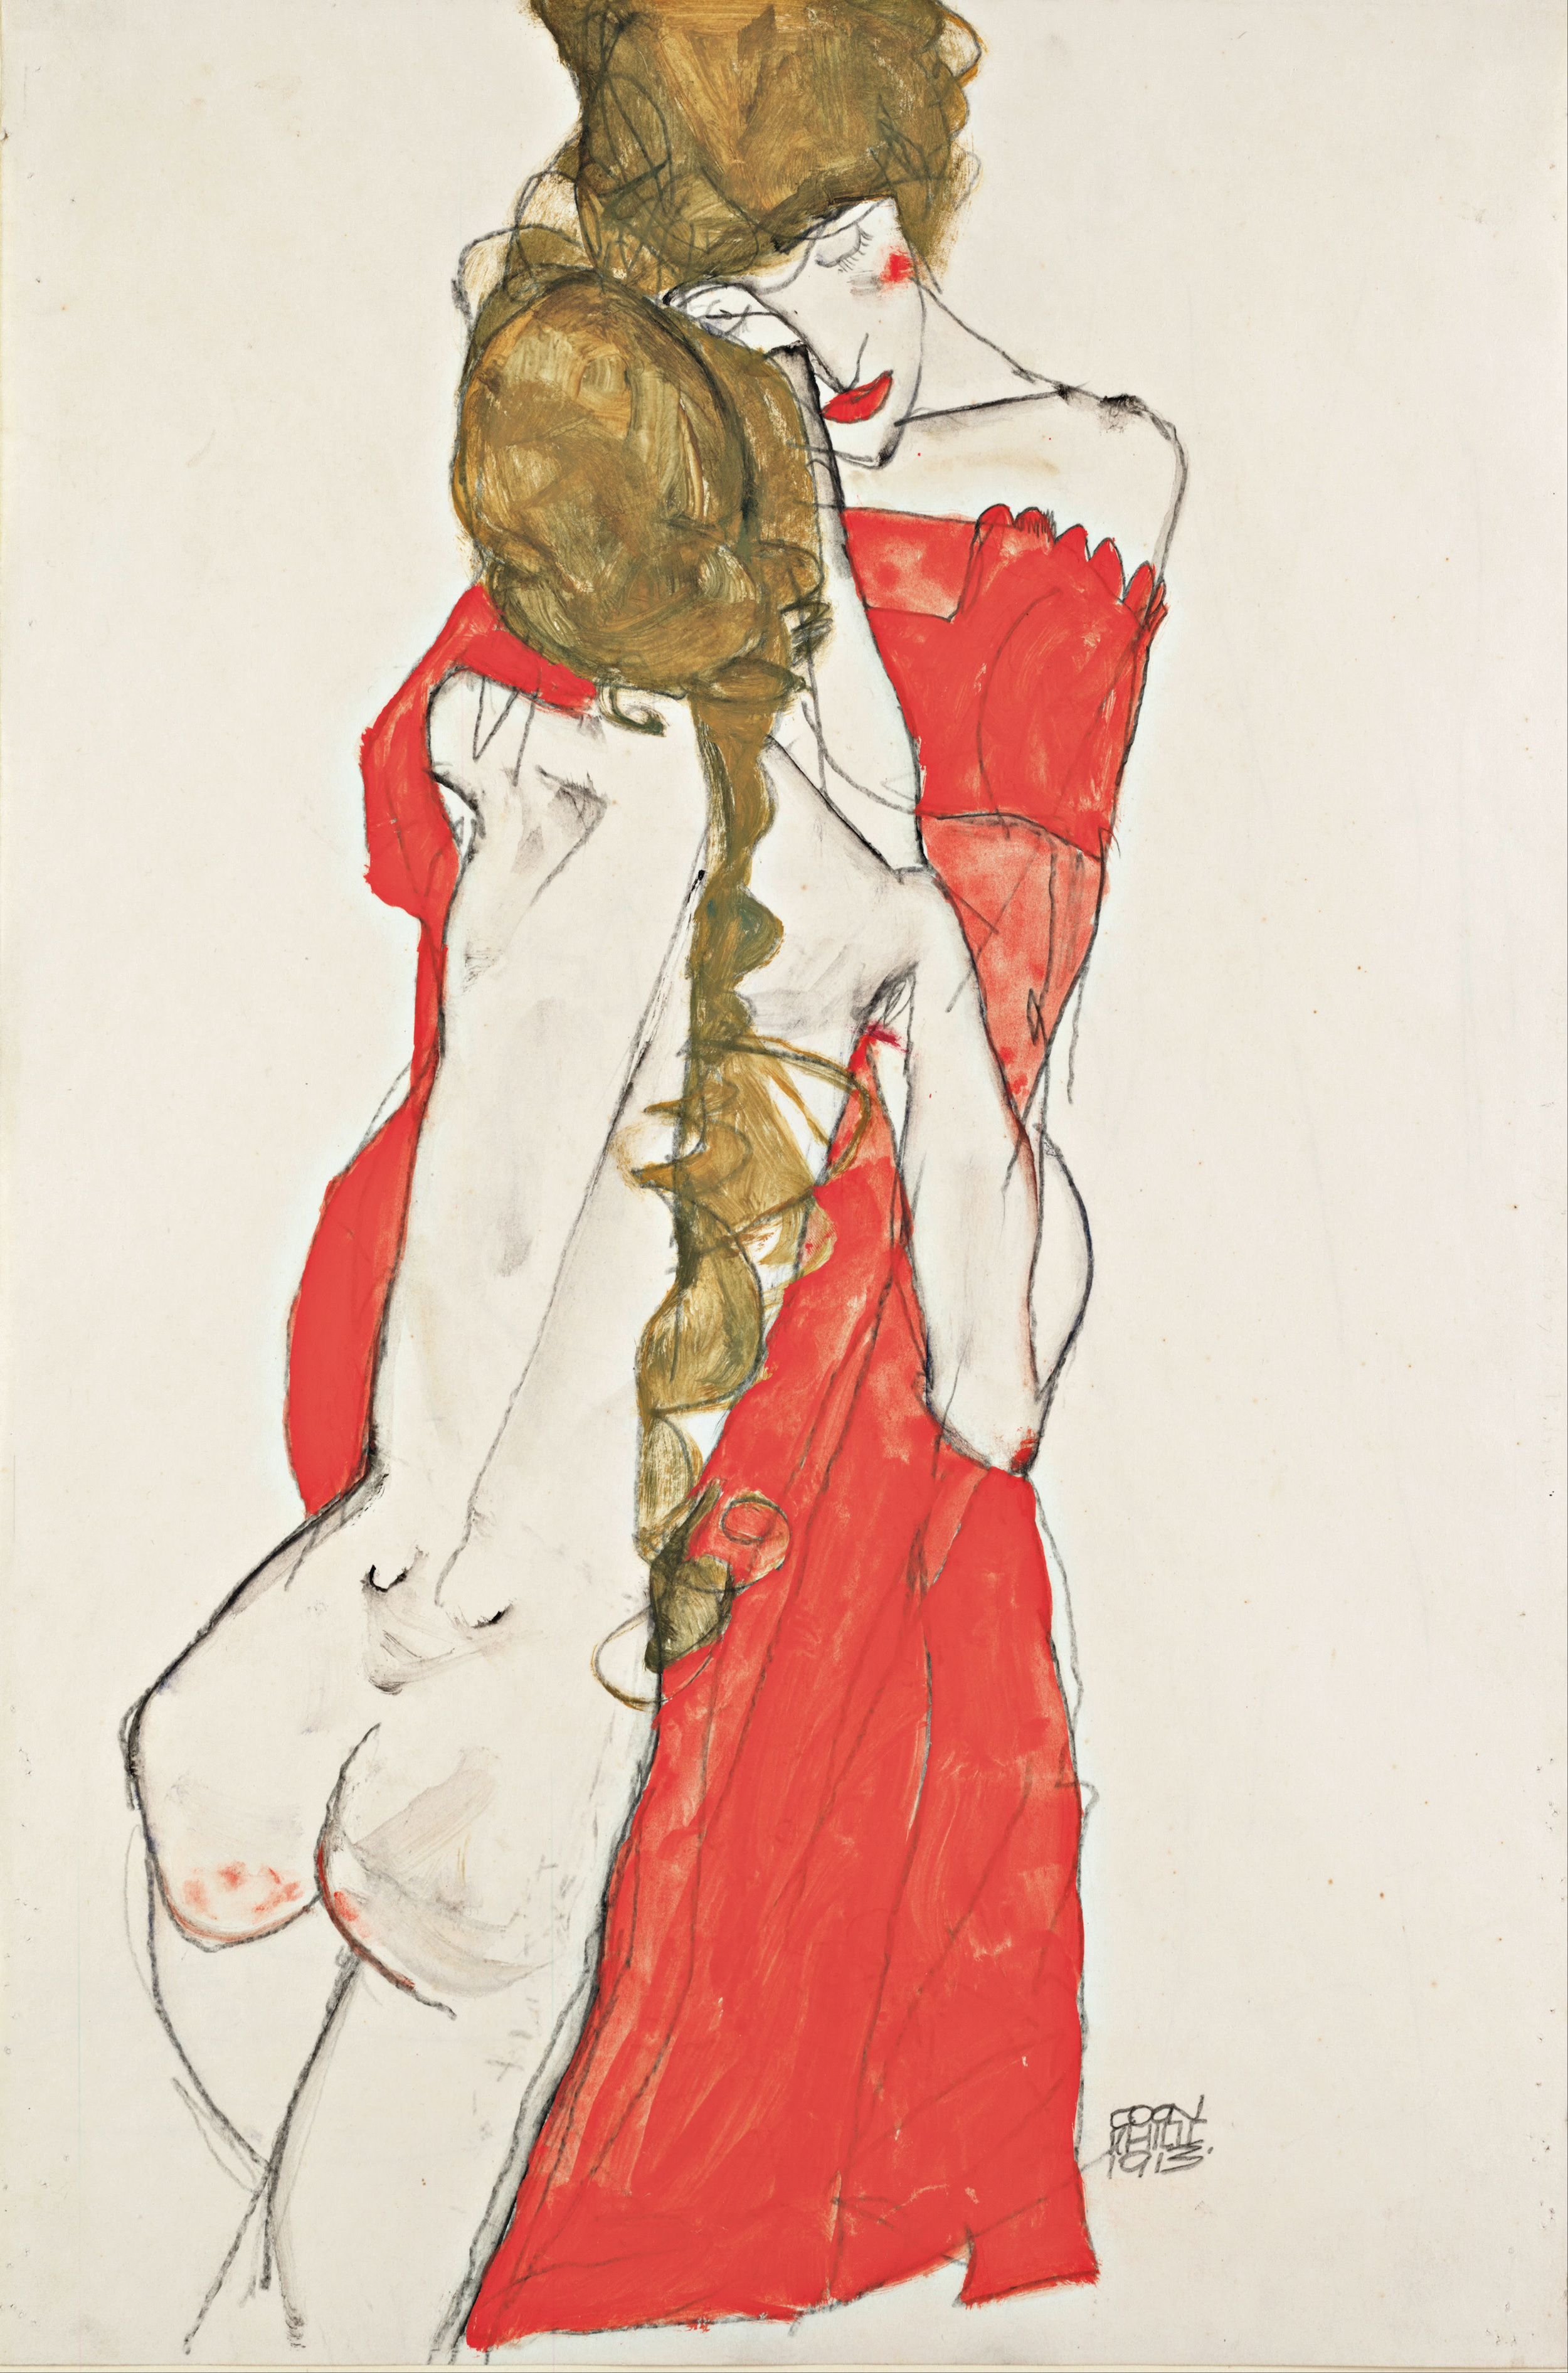 Mother and Daughter by Egon Schiele - c. 1913 - 31.1 x 47.9 cm Leopold Museum